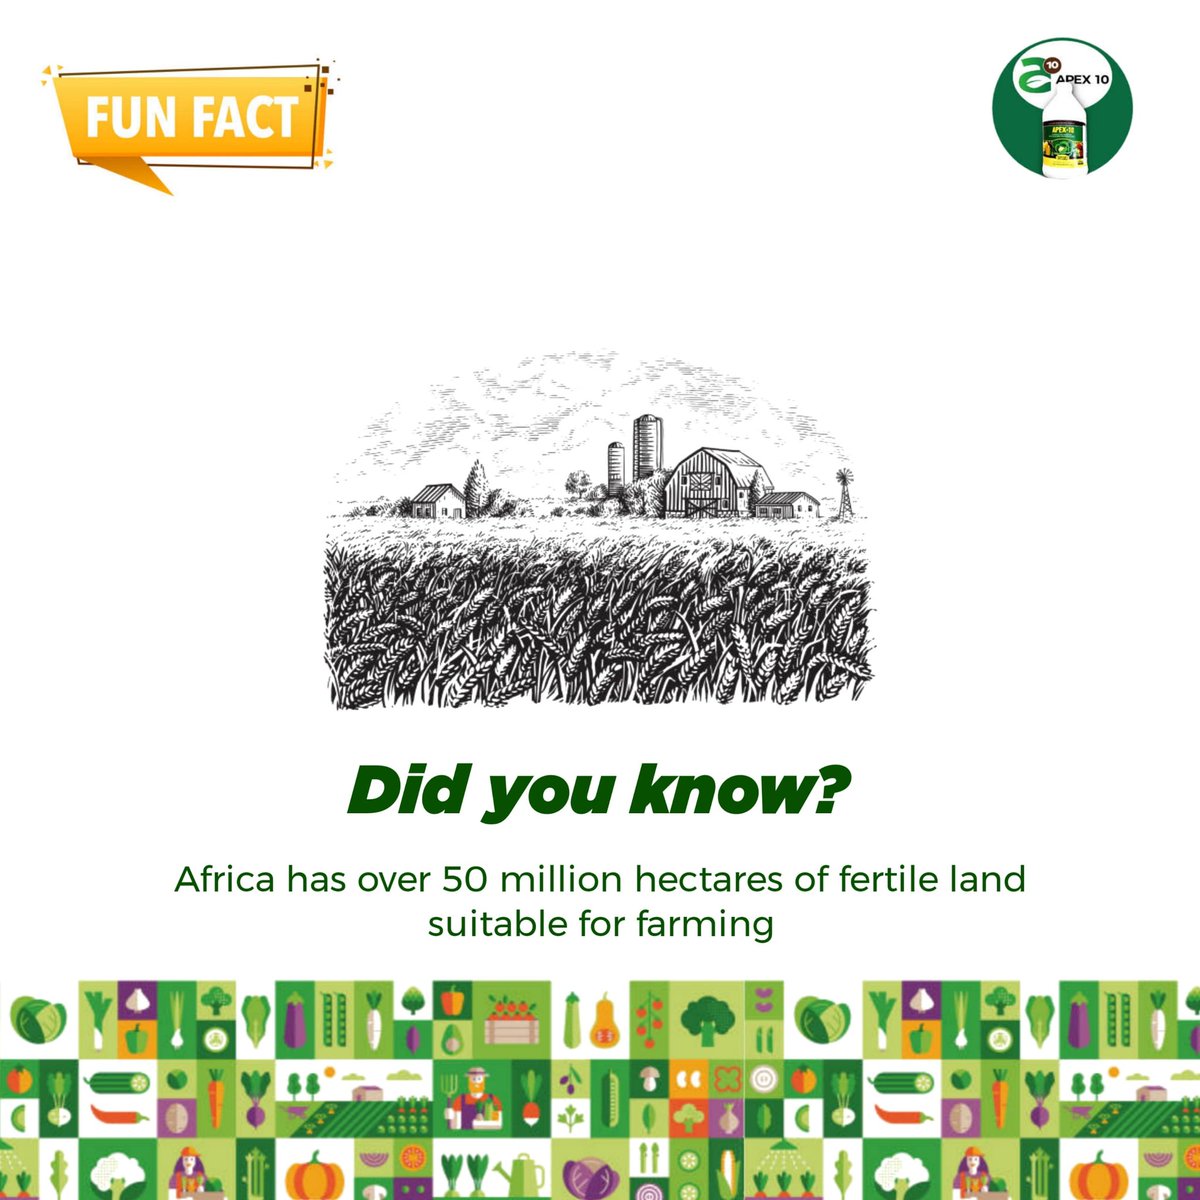 OVER 50 MILLION HECTARES OF FERTILE LAND? 
African governments aren’t taking enough advantage of this gift we have. What do you think about this fun fact? Retweet to educate someone 🤗
#FunFactFriday #TGIFriday #agriculture #farming #Africa